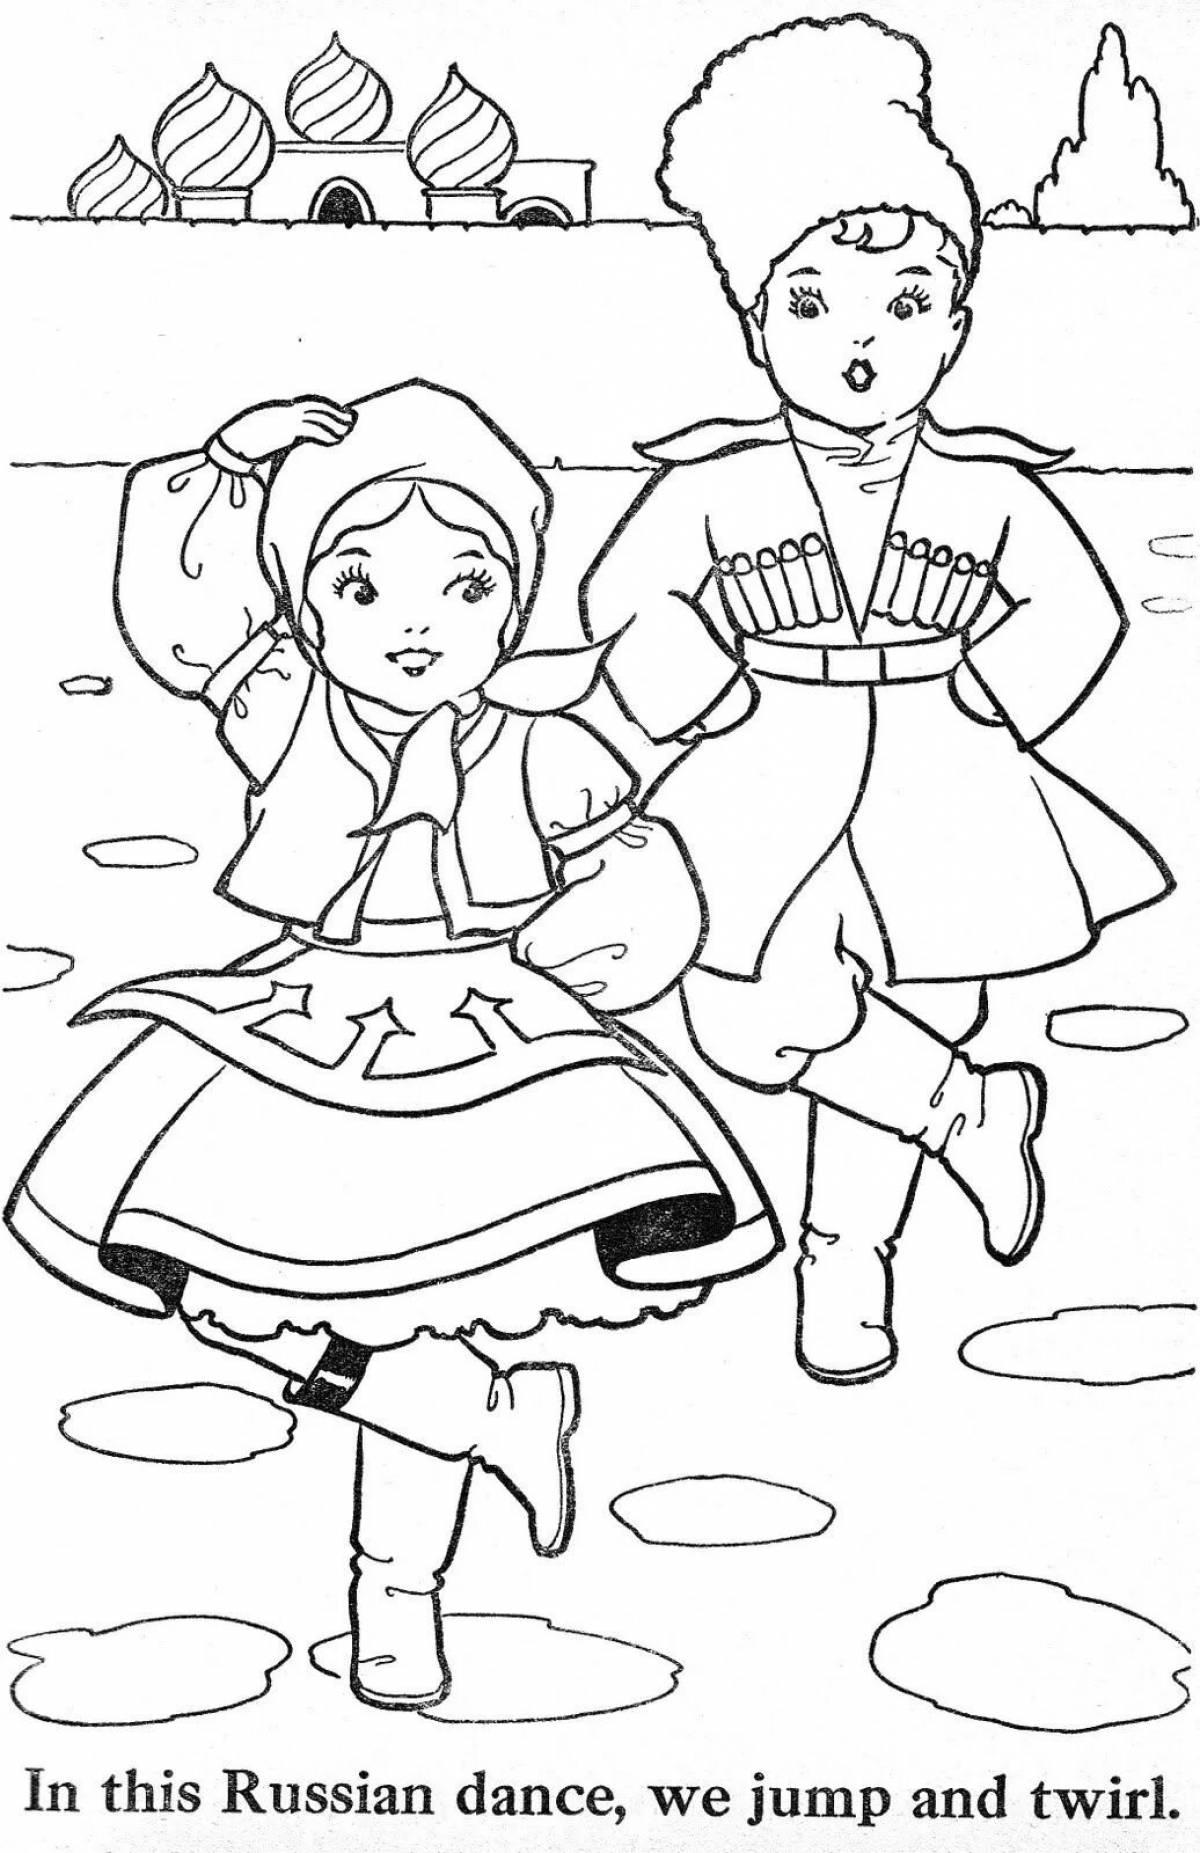 Coloring pages beckoning Cossacks for children